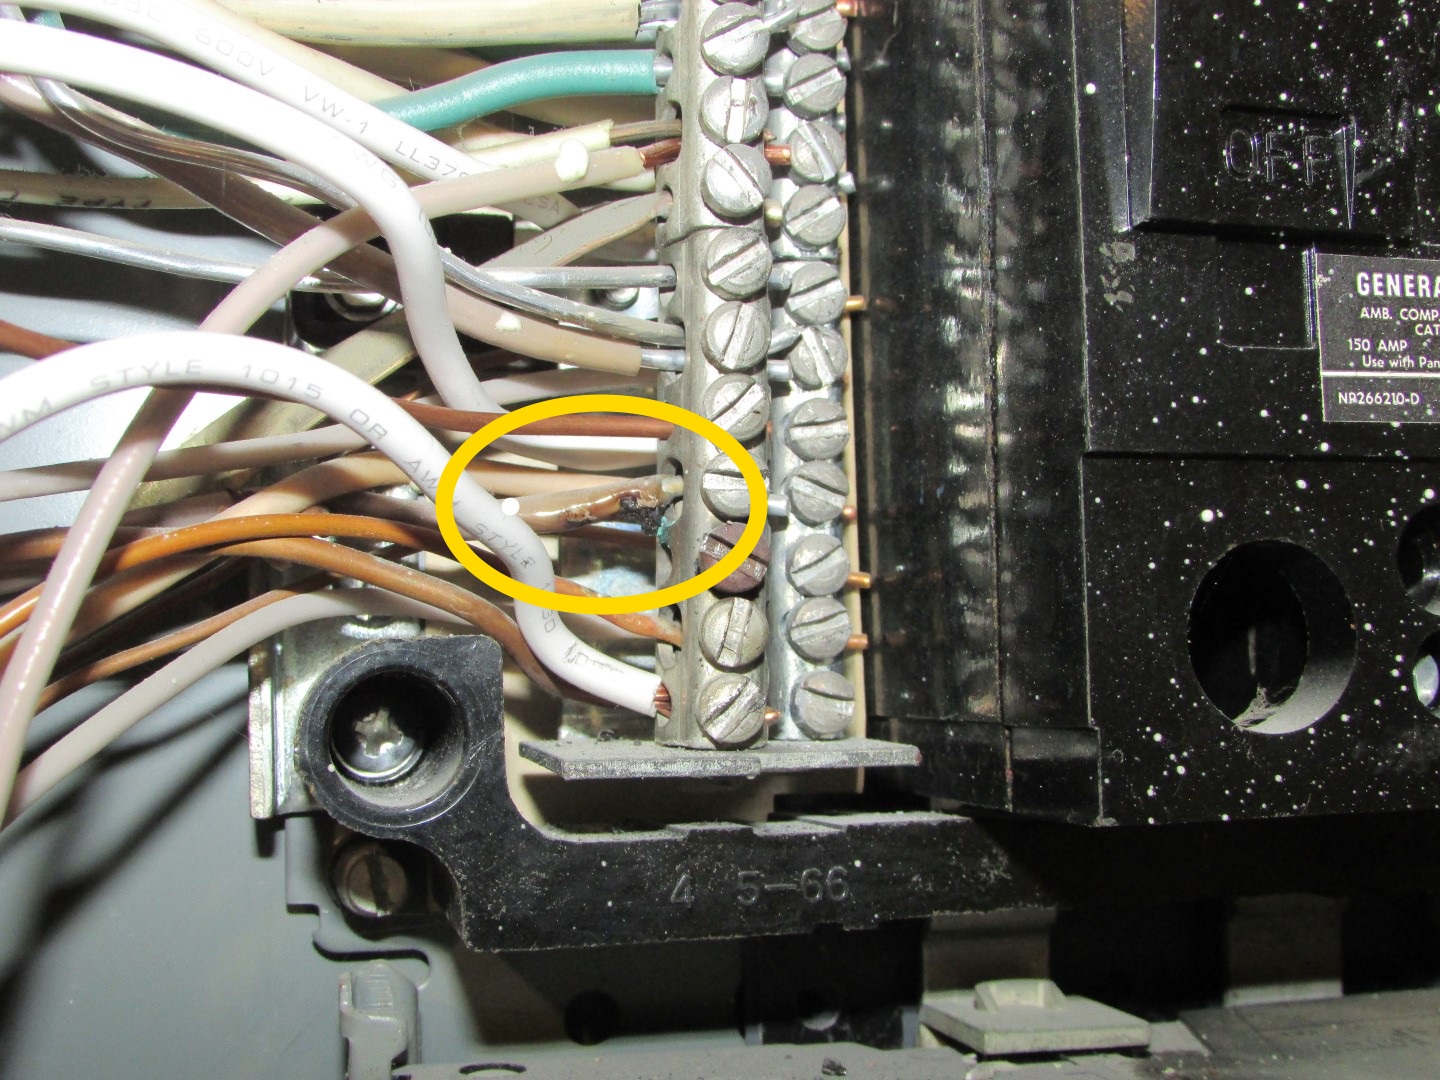 When did they stop using cloth wiring